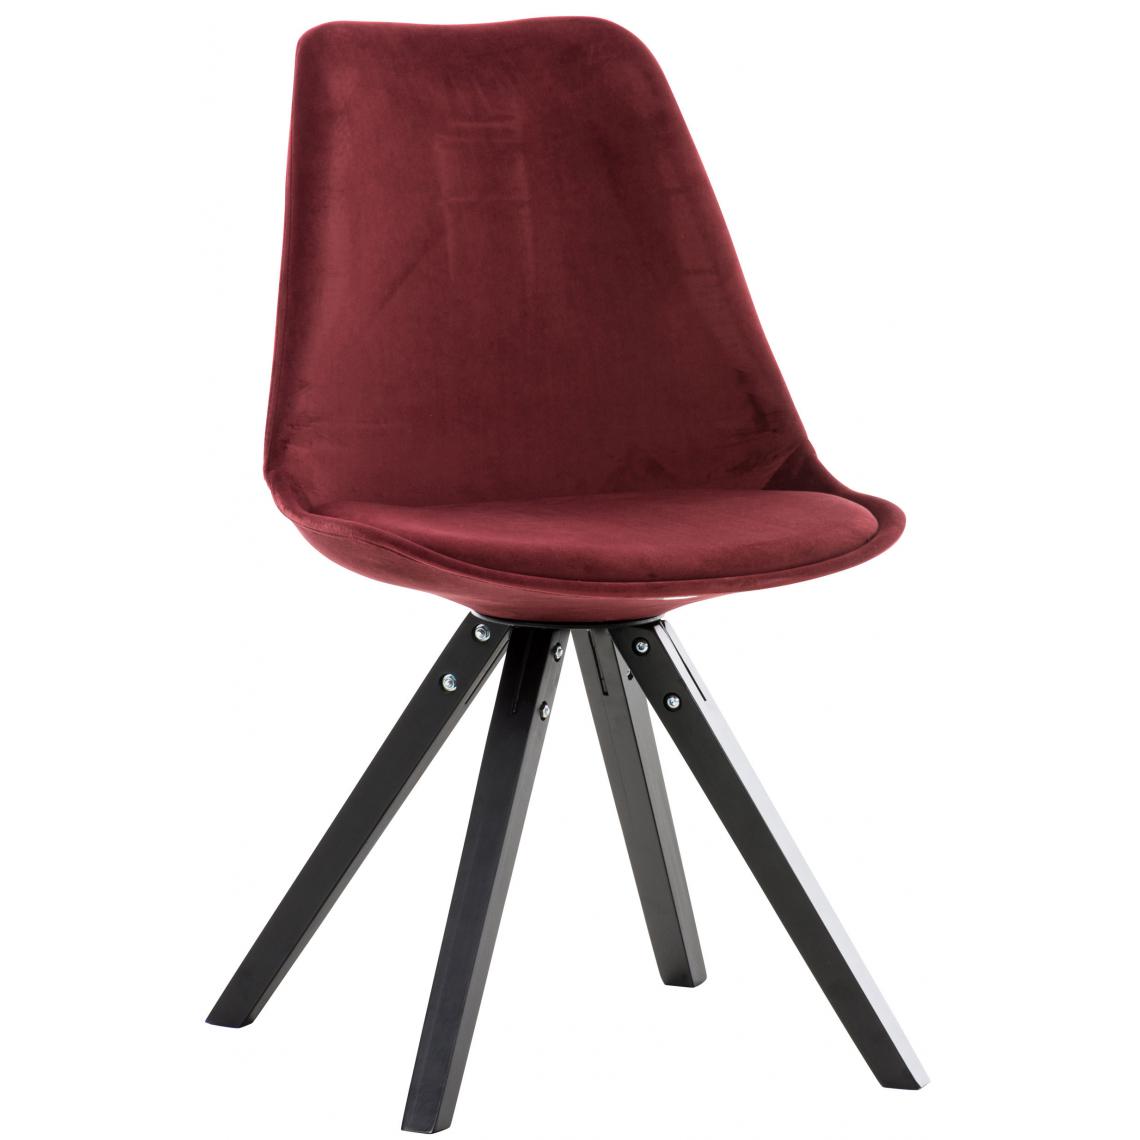 Icaverne - Inedit Chaise serie Manille Velvet Square noire couleur rouge - Chaises